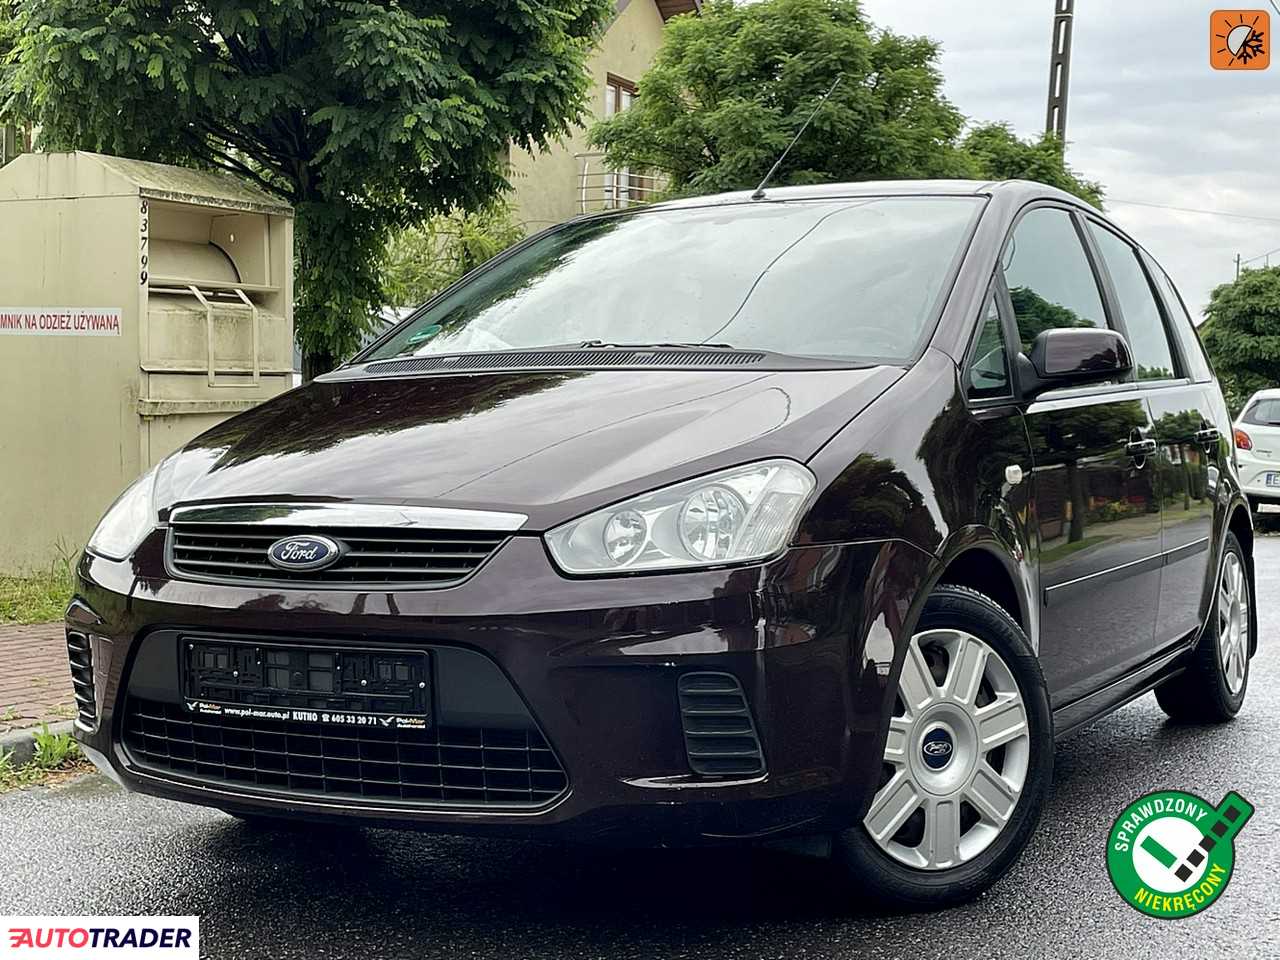 Ford C-MAX 2008 1.6 101 KM